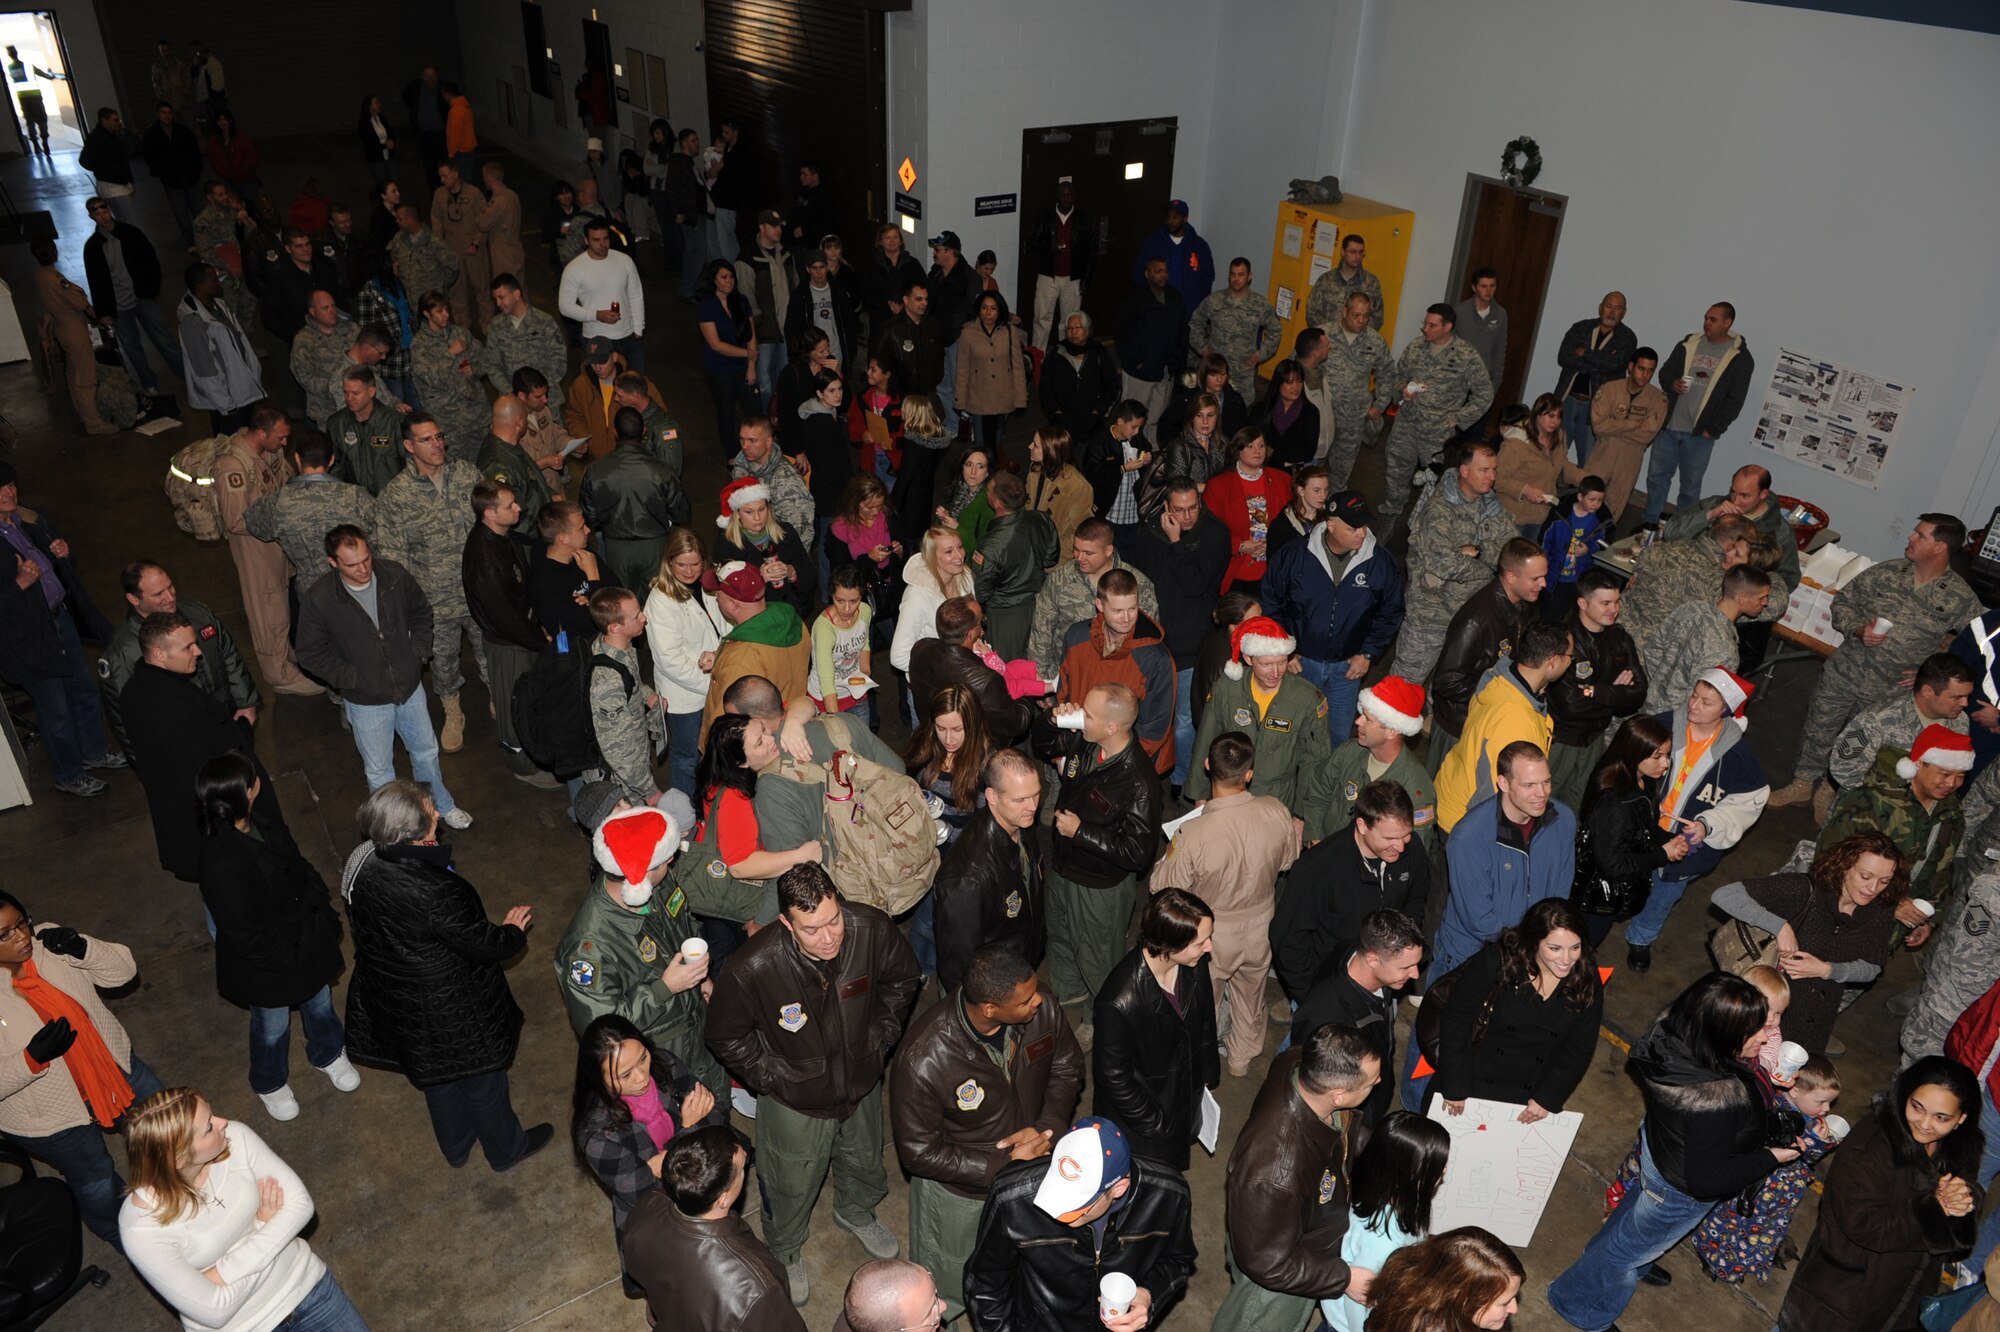 Friends, families and co-workers came together to welcome back their friends and loved ones from a deployment Dec. 25 at Bldg. 430. Nearly 160 Airmen returned home Christmas Day. (U.S. Air Force photo by Senior Airman Ethan Morgan)